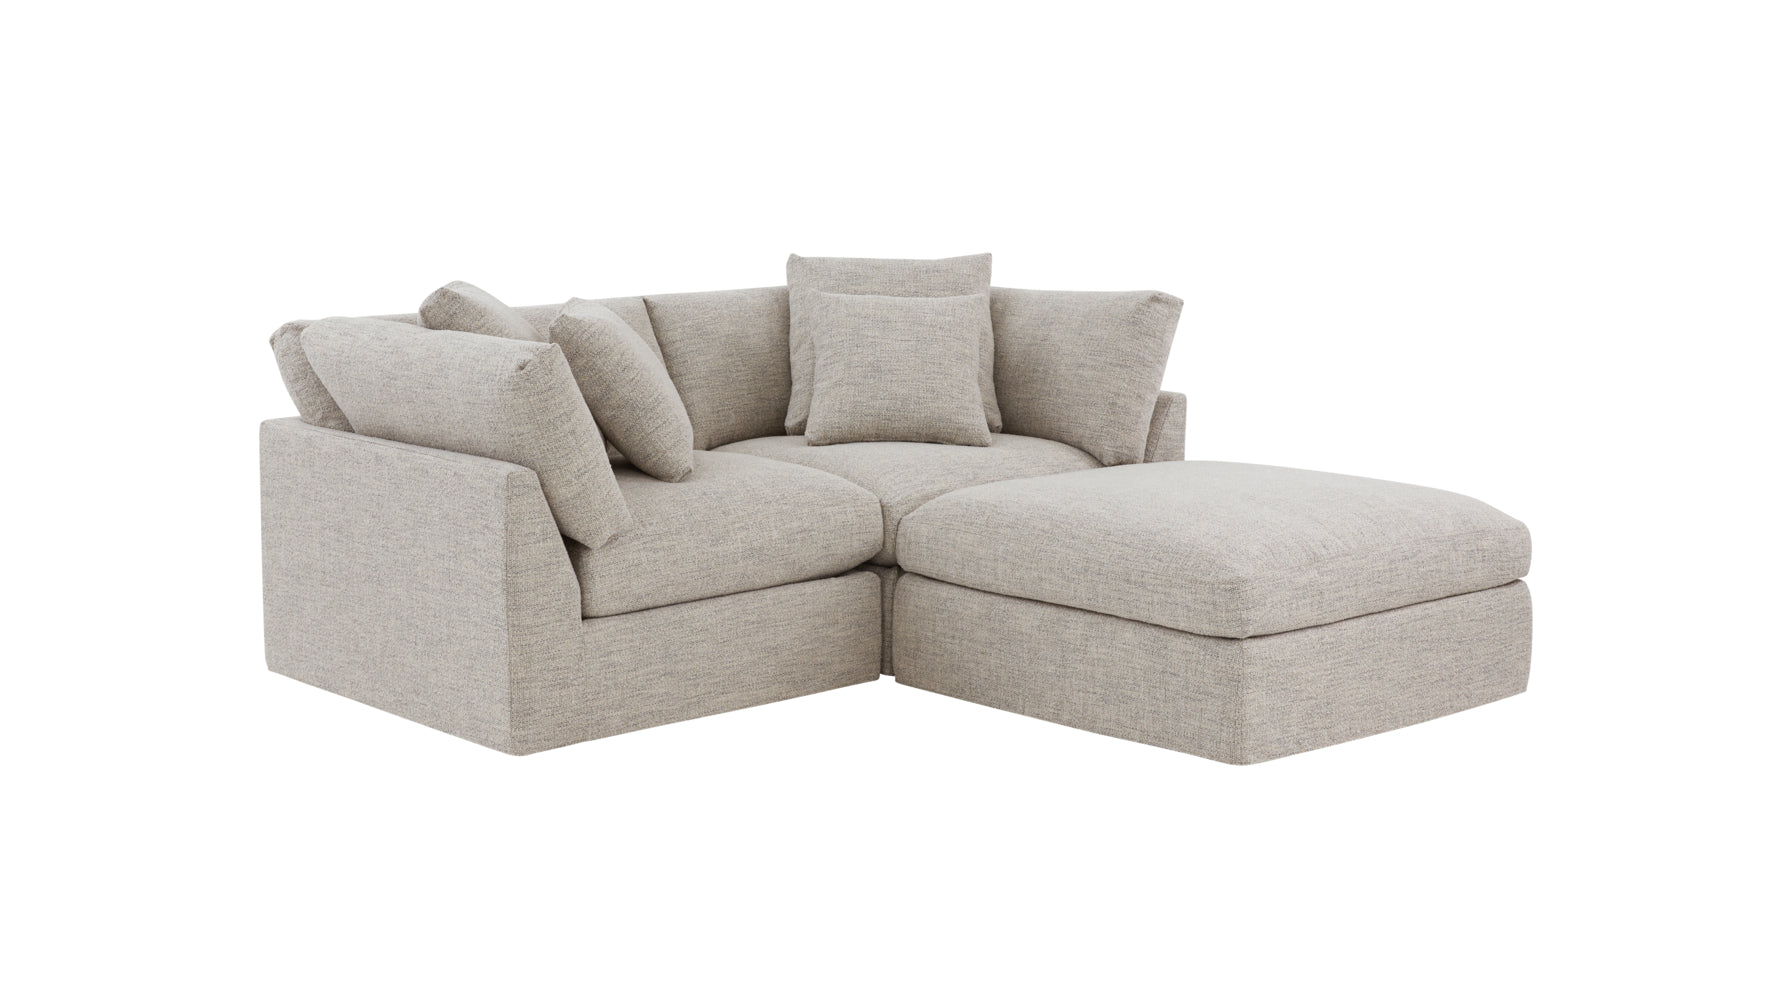 Get Together™ 3-Piece Modular Sectional, Large, Oatmeal - Image 2